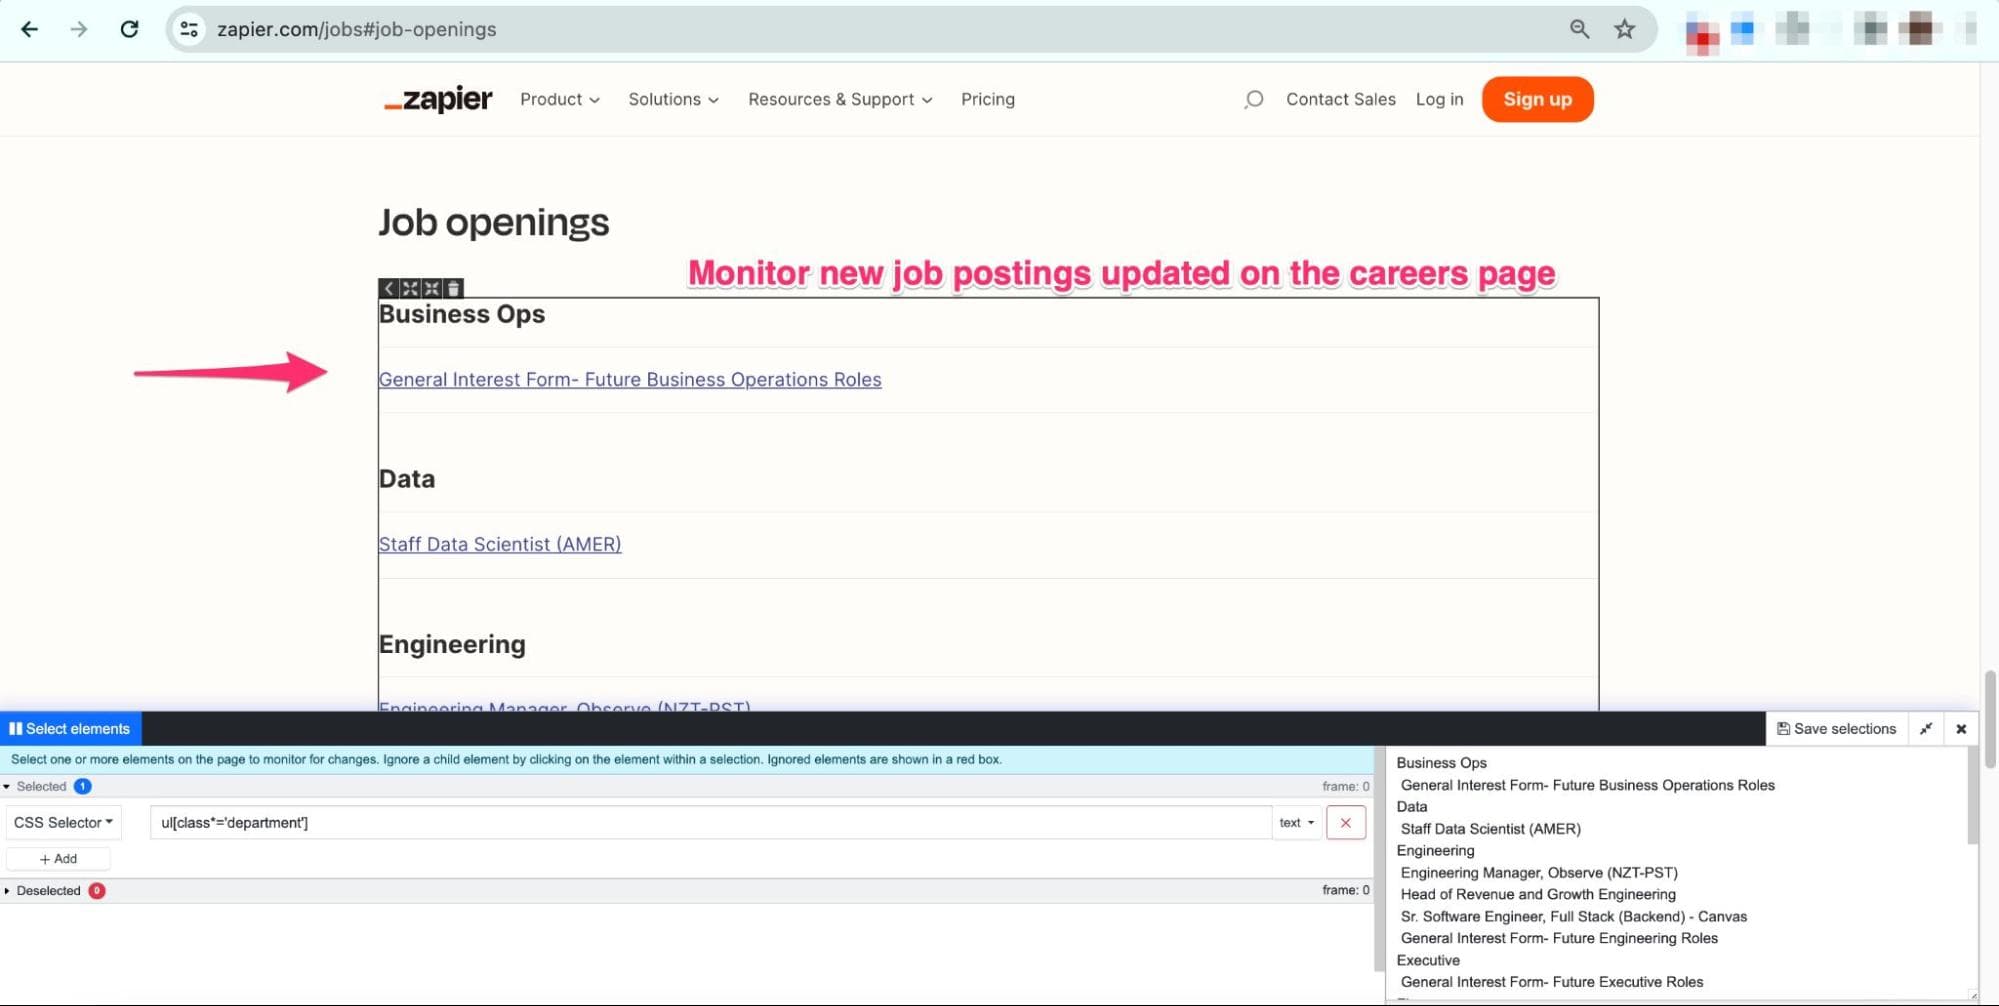 Finding new job openings